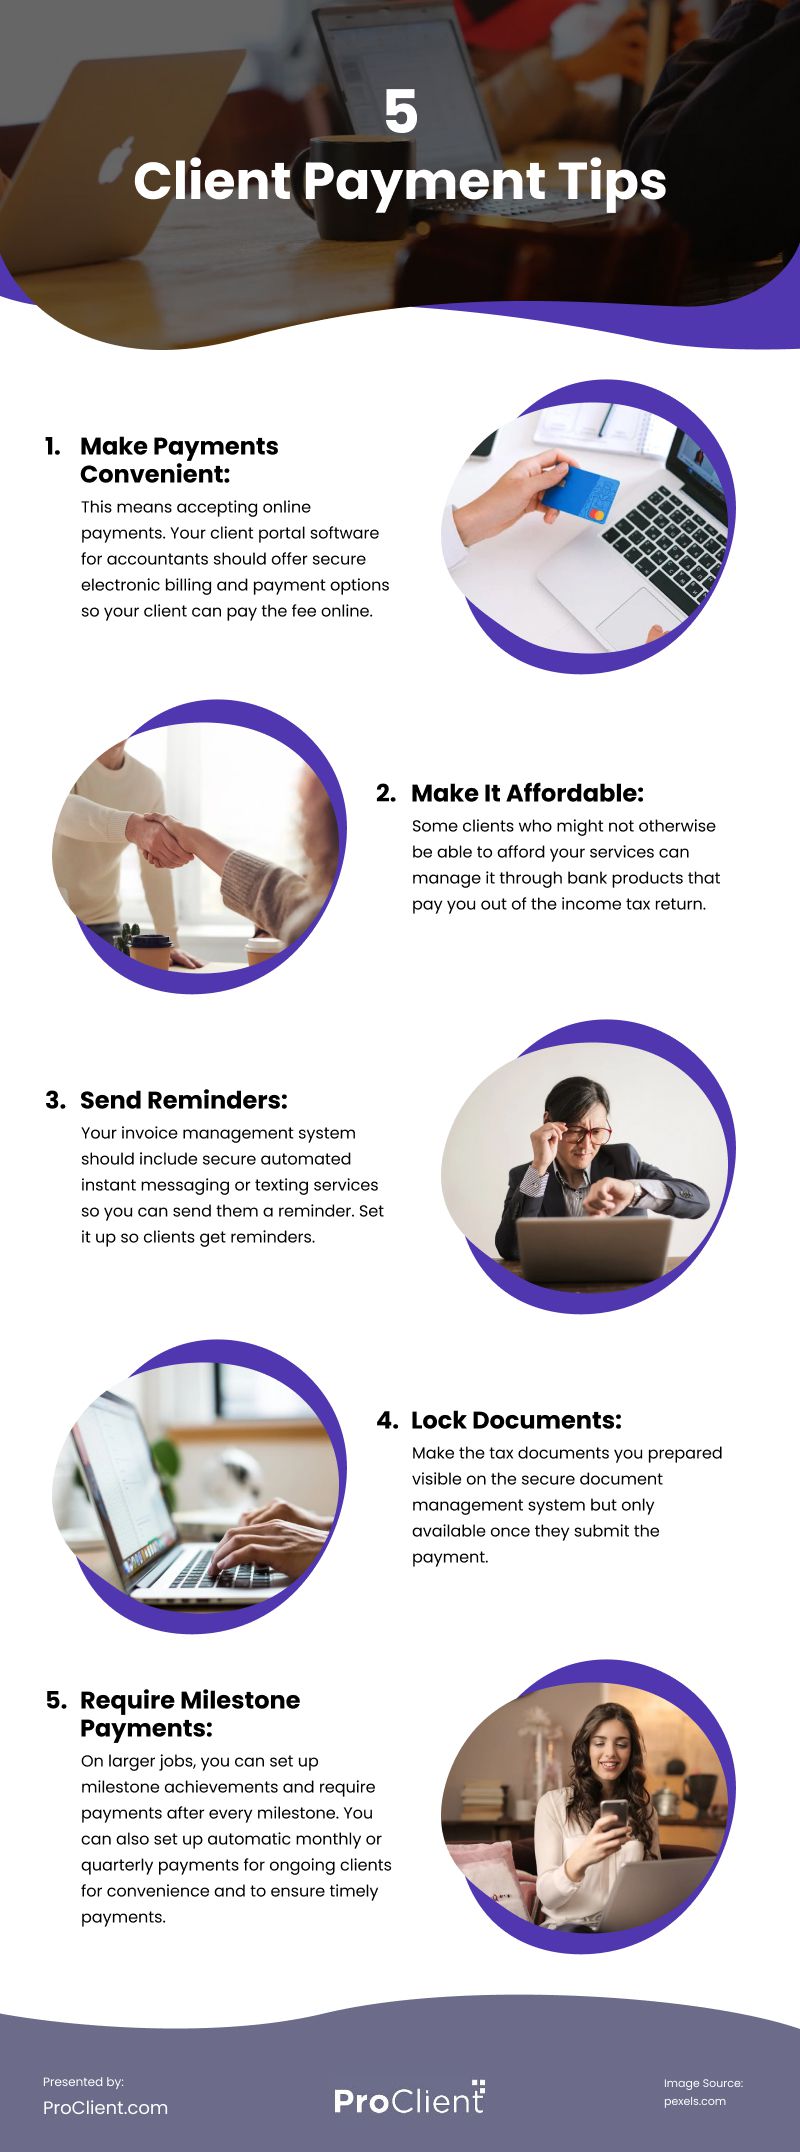 5 Client Payment Tips Infographic